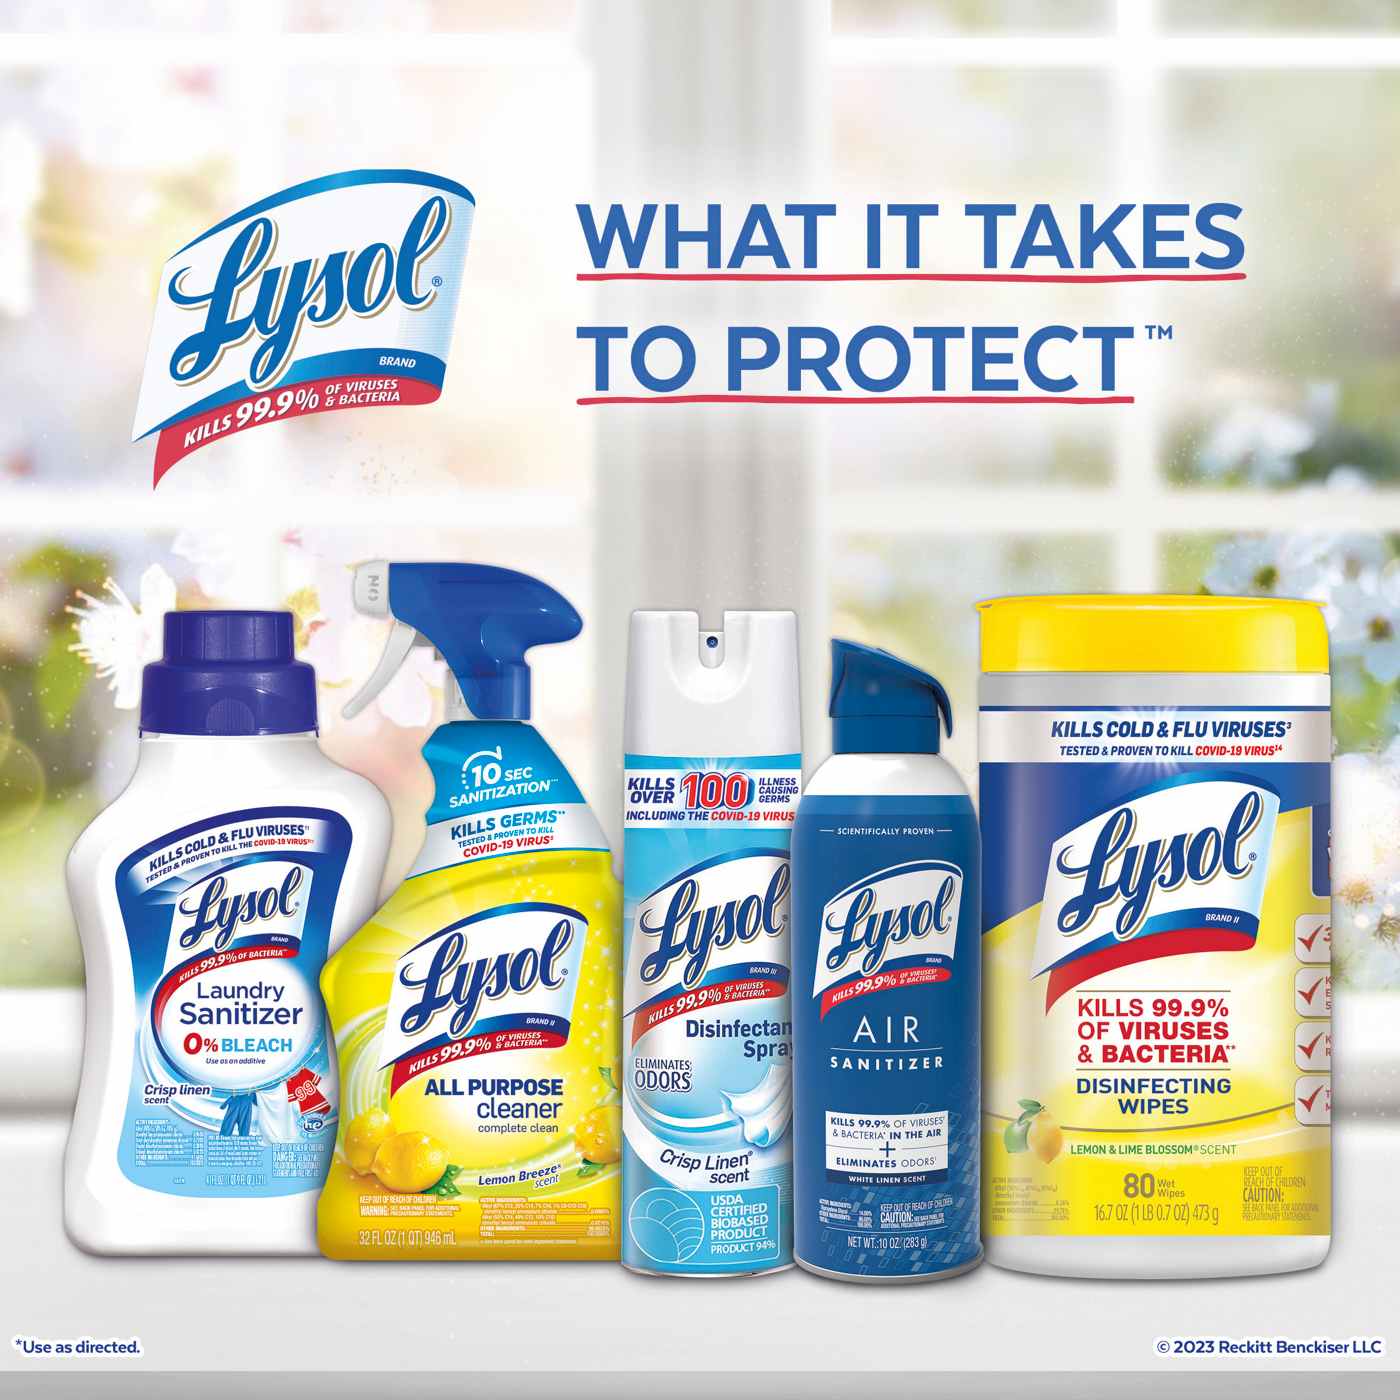 Lysol Early Morning Breeze Scent Disinfectant Spray; image 2 of 6